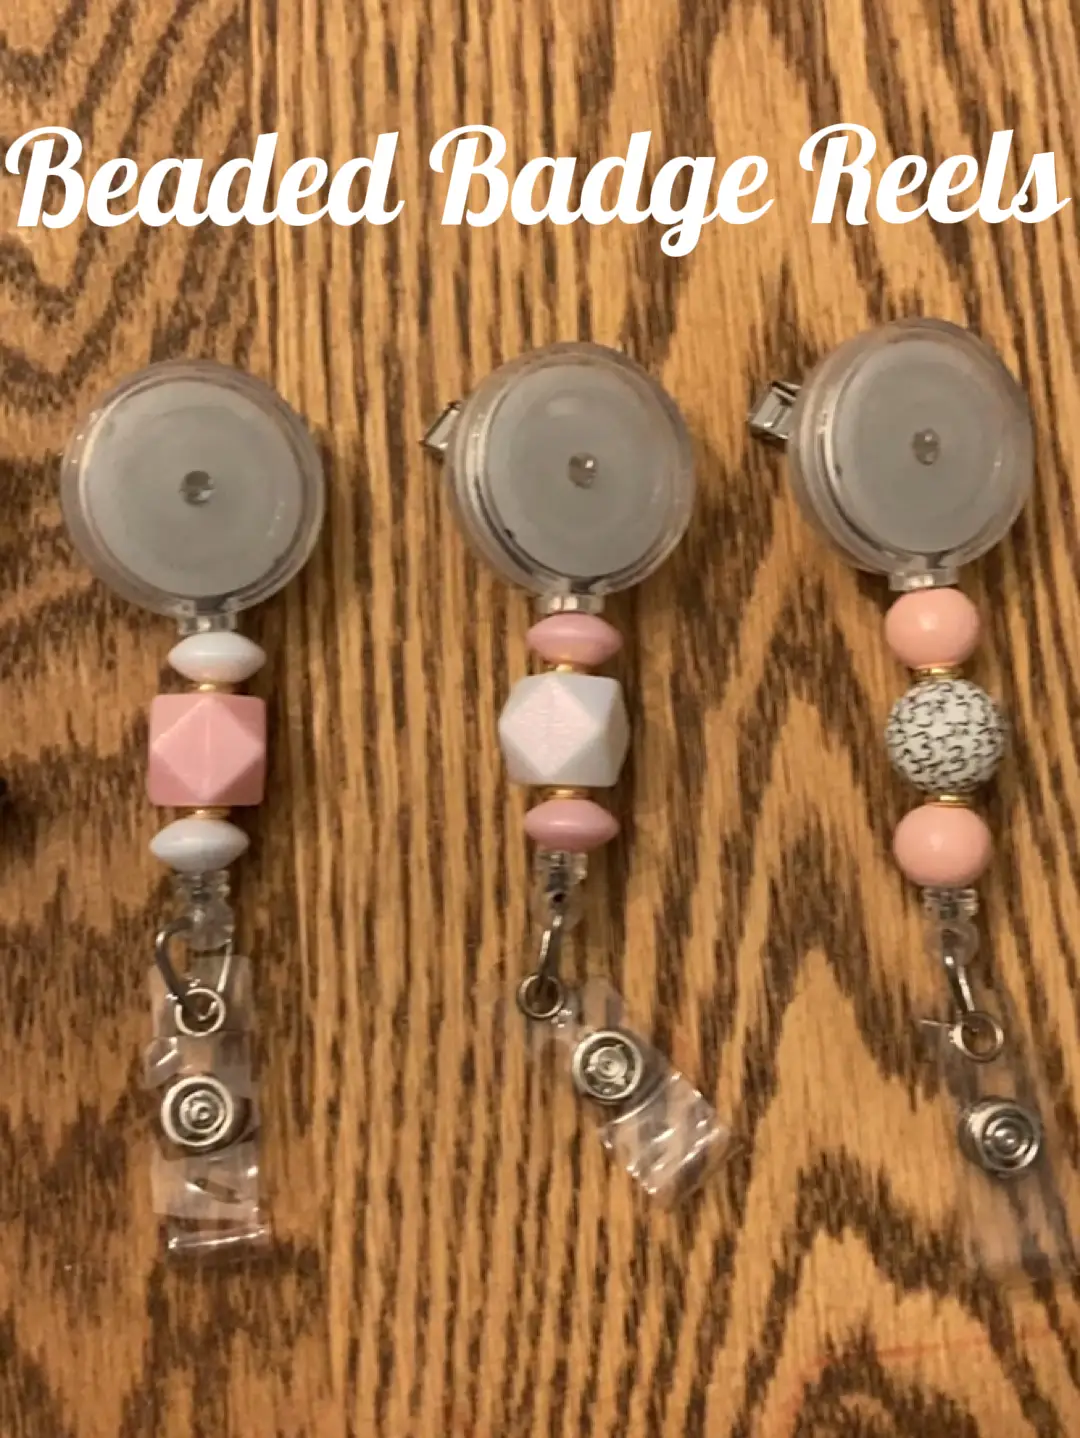 New Beaded Badge Reels, Video published by TheSidneyStudio